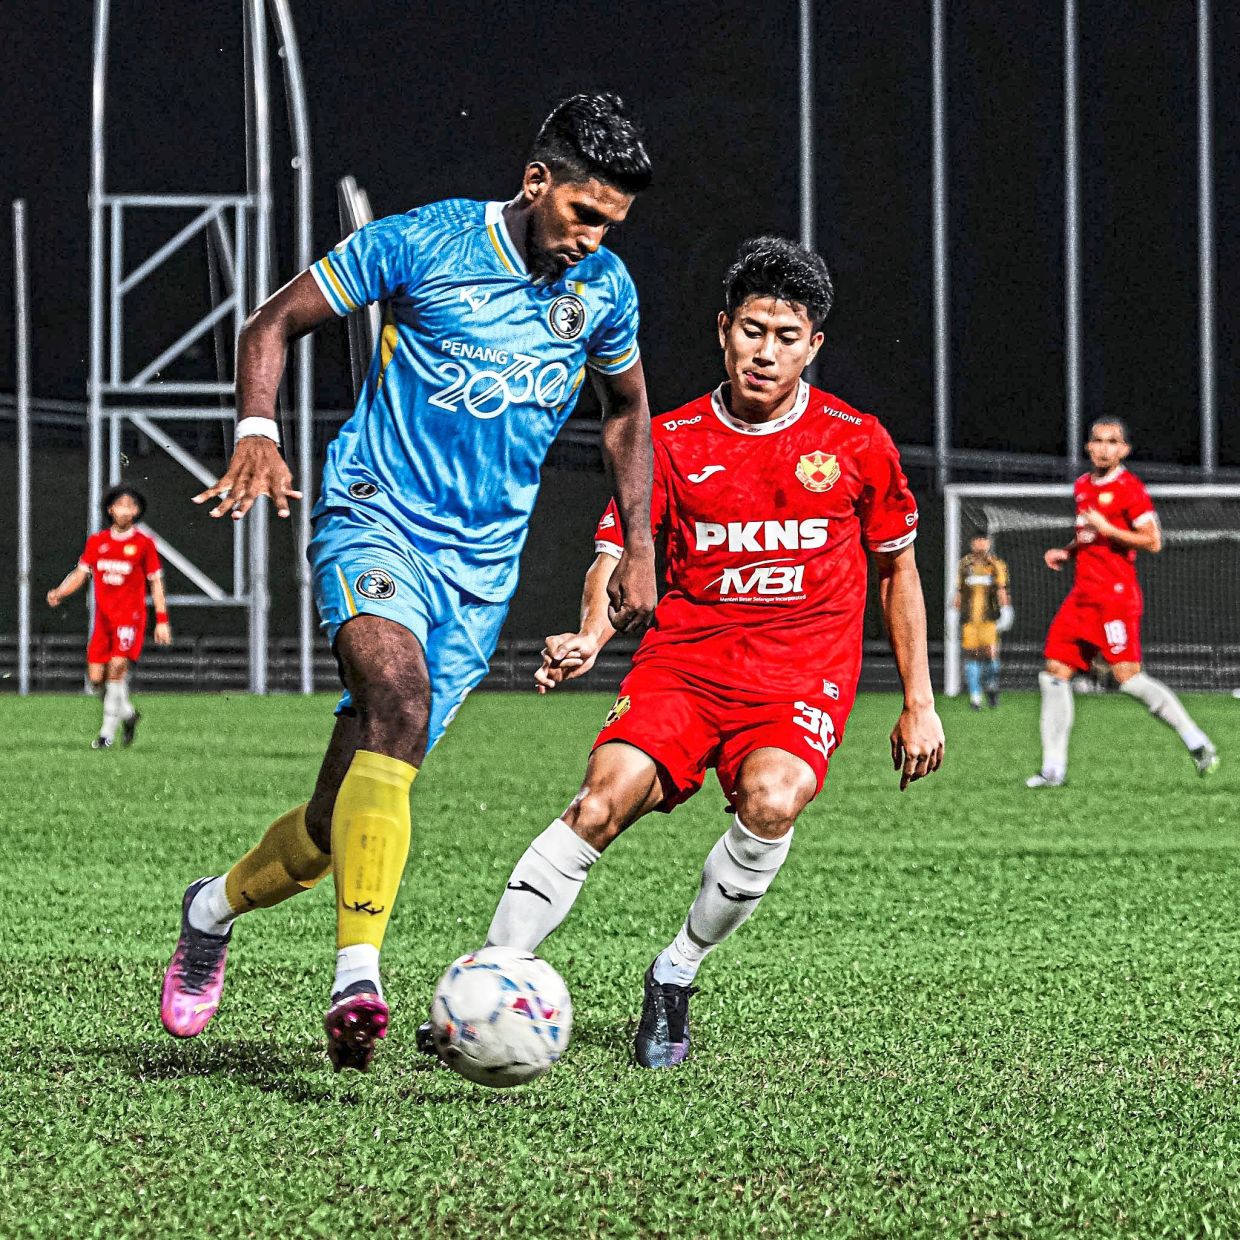 Htet Aung aims to get on the scoring sheet with Negri